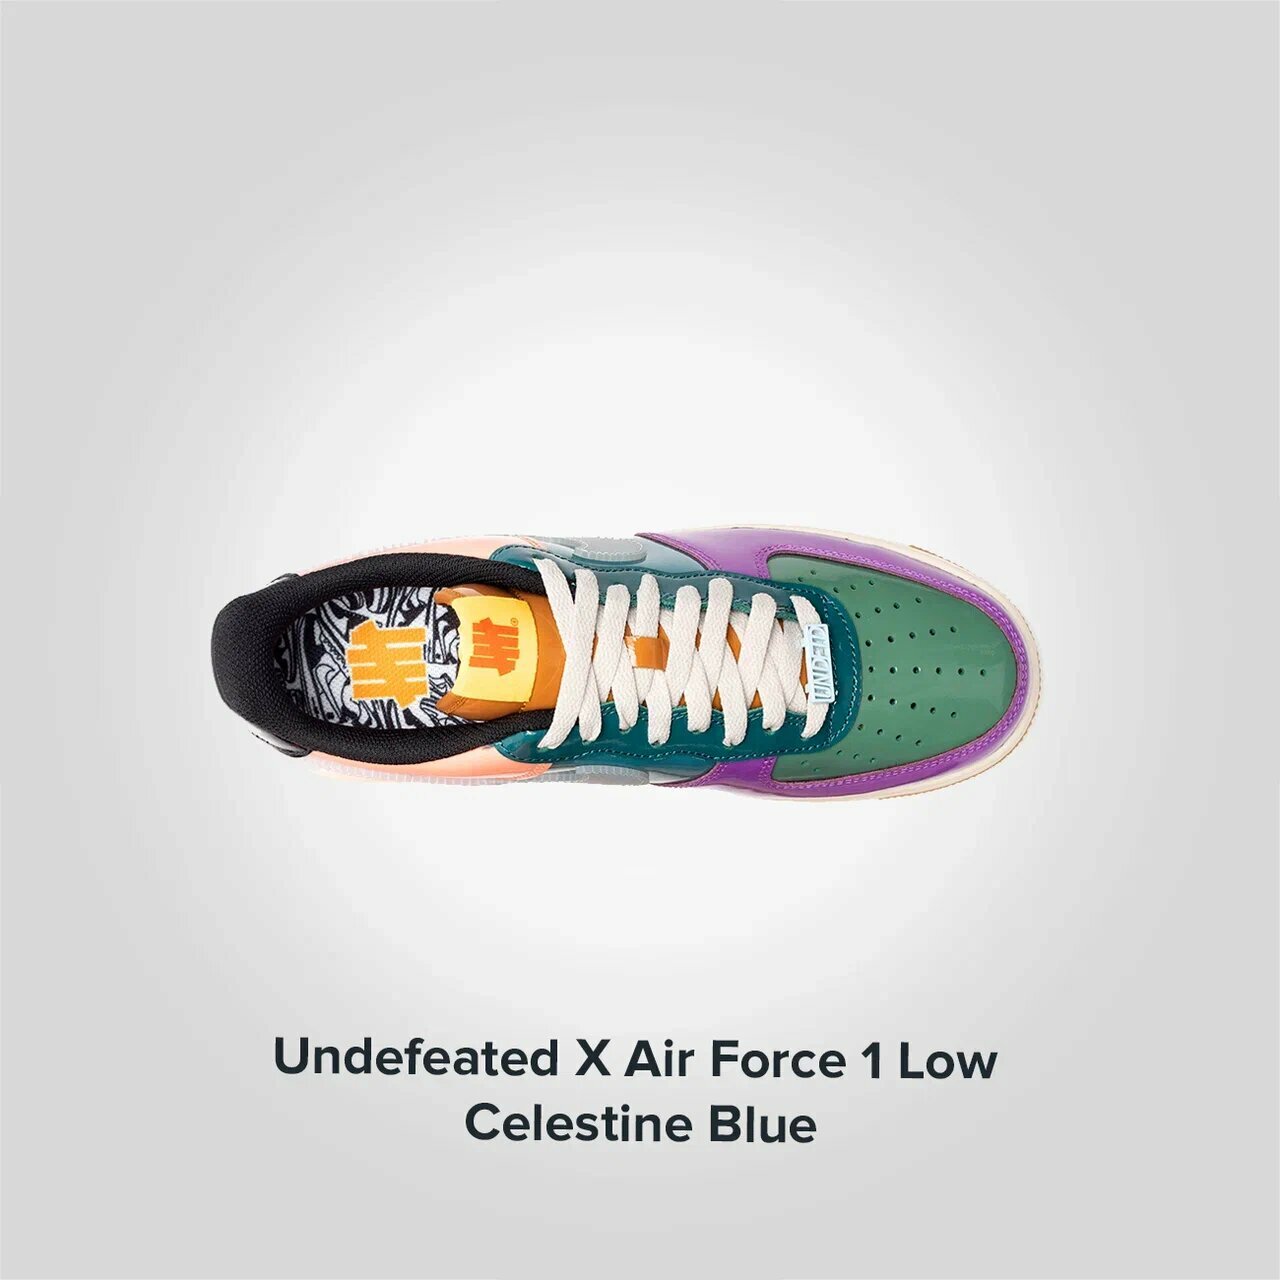 Undefeated X Air Force 1 Low Celestine Blue